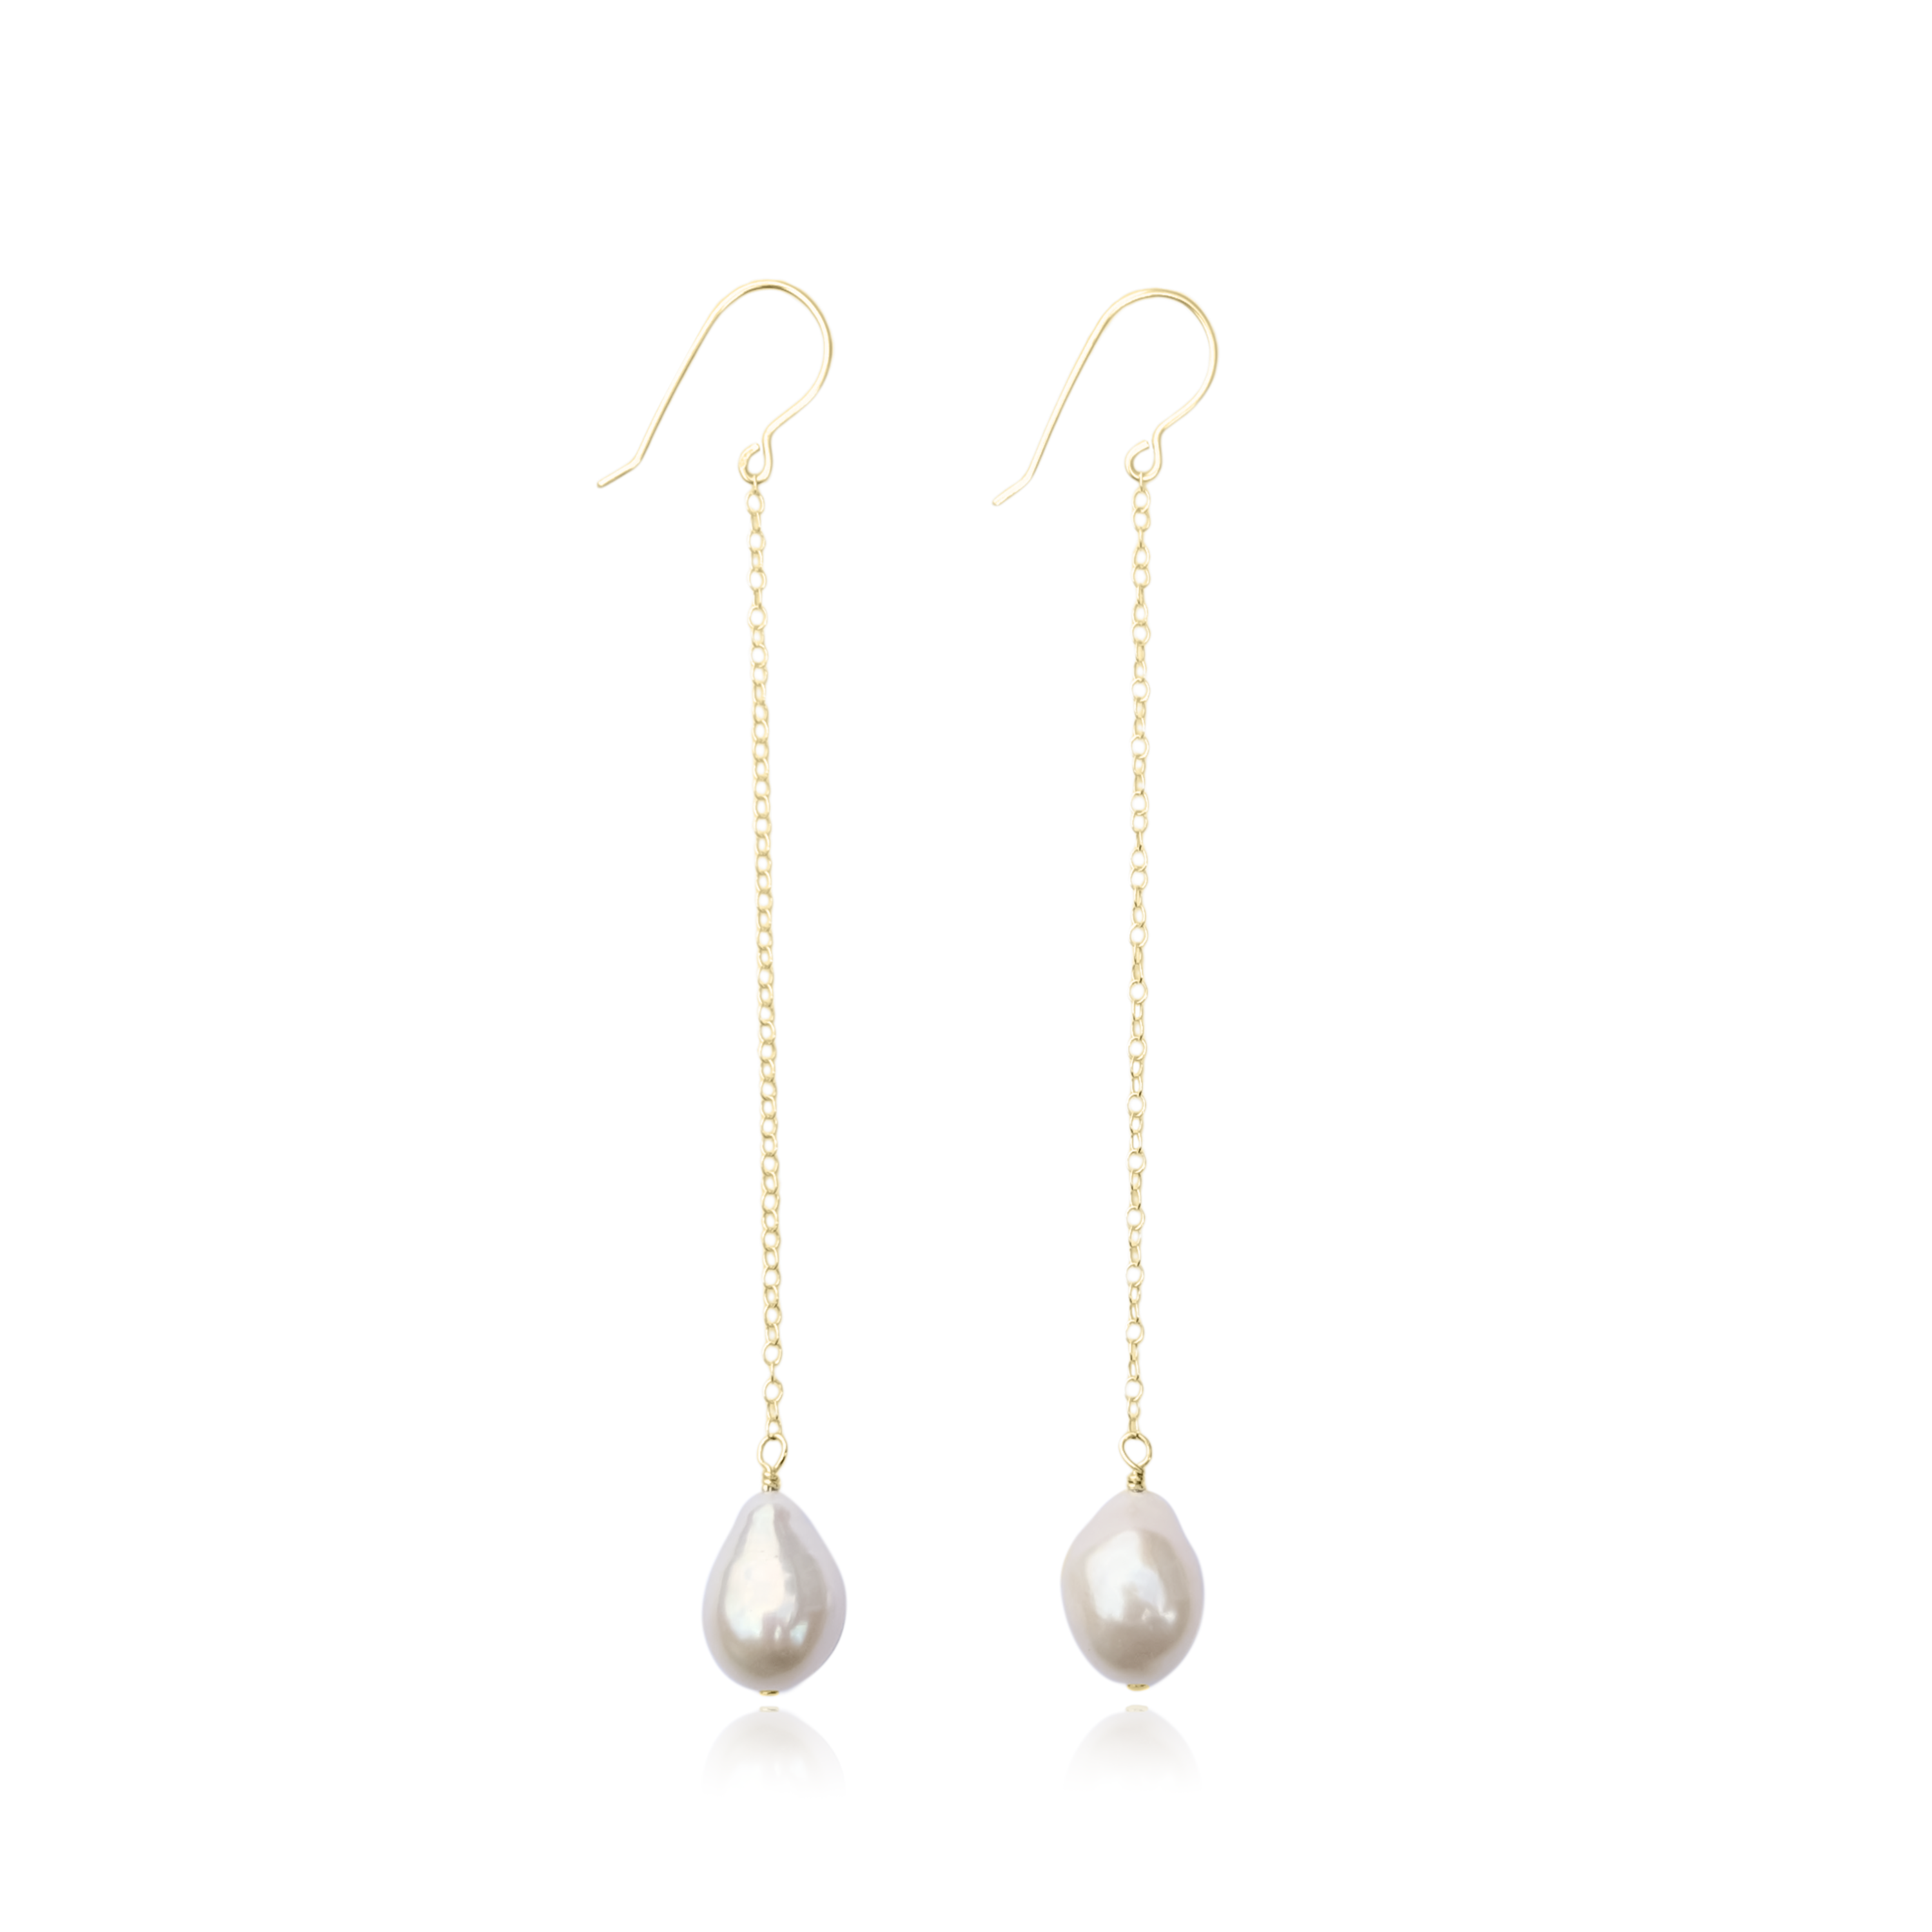 long pearl chain earrings in gold filled on white background